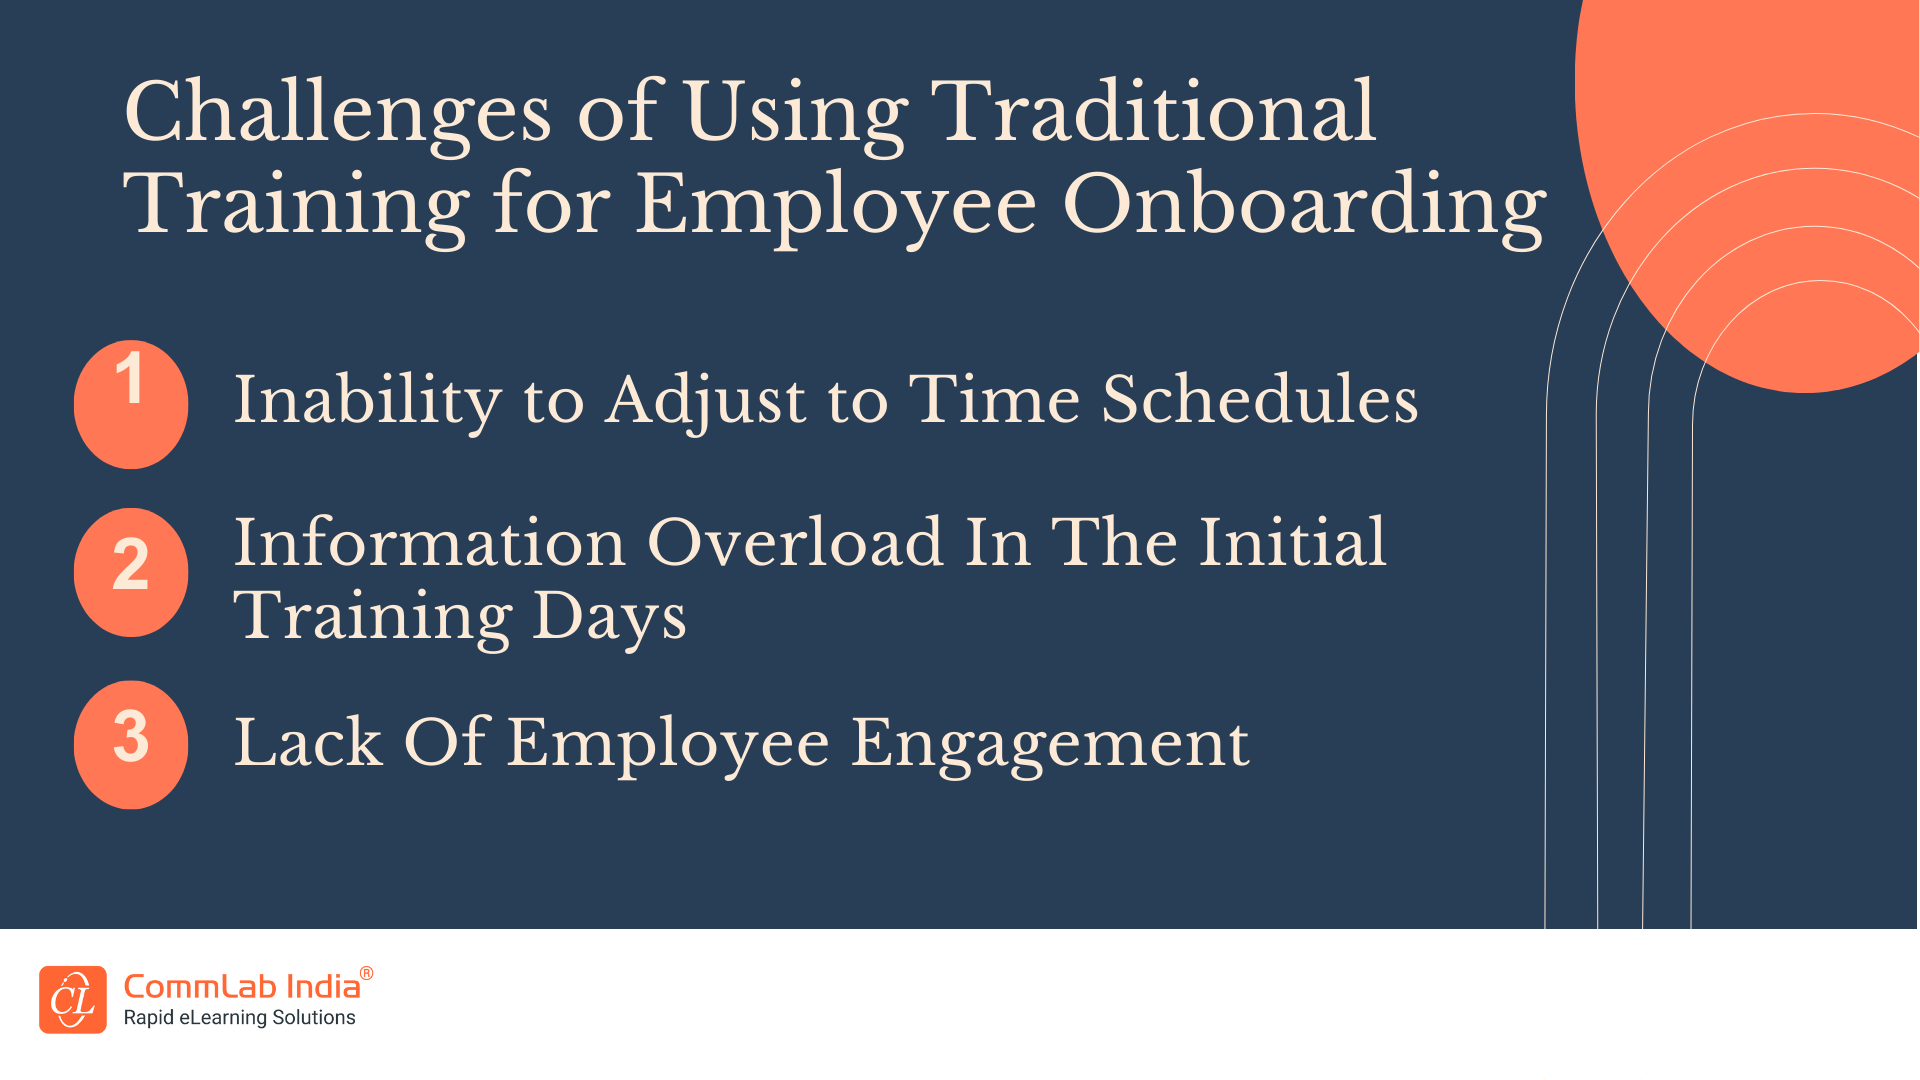 Challenges of Using Traditional Training for Employee Onboarding